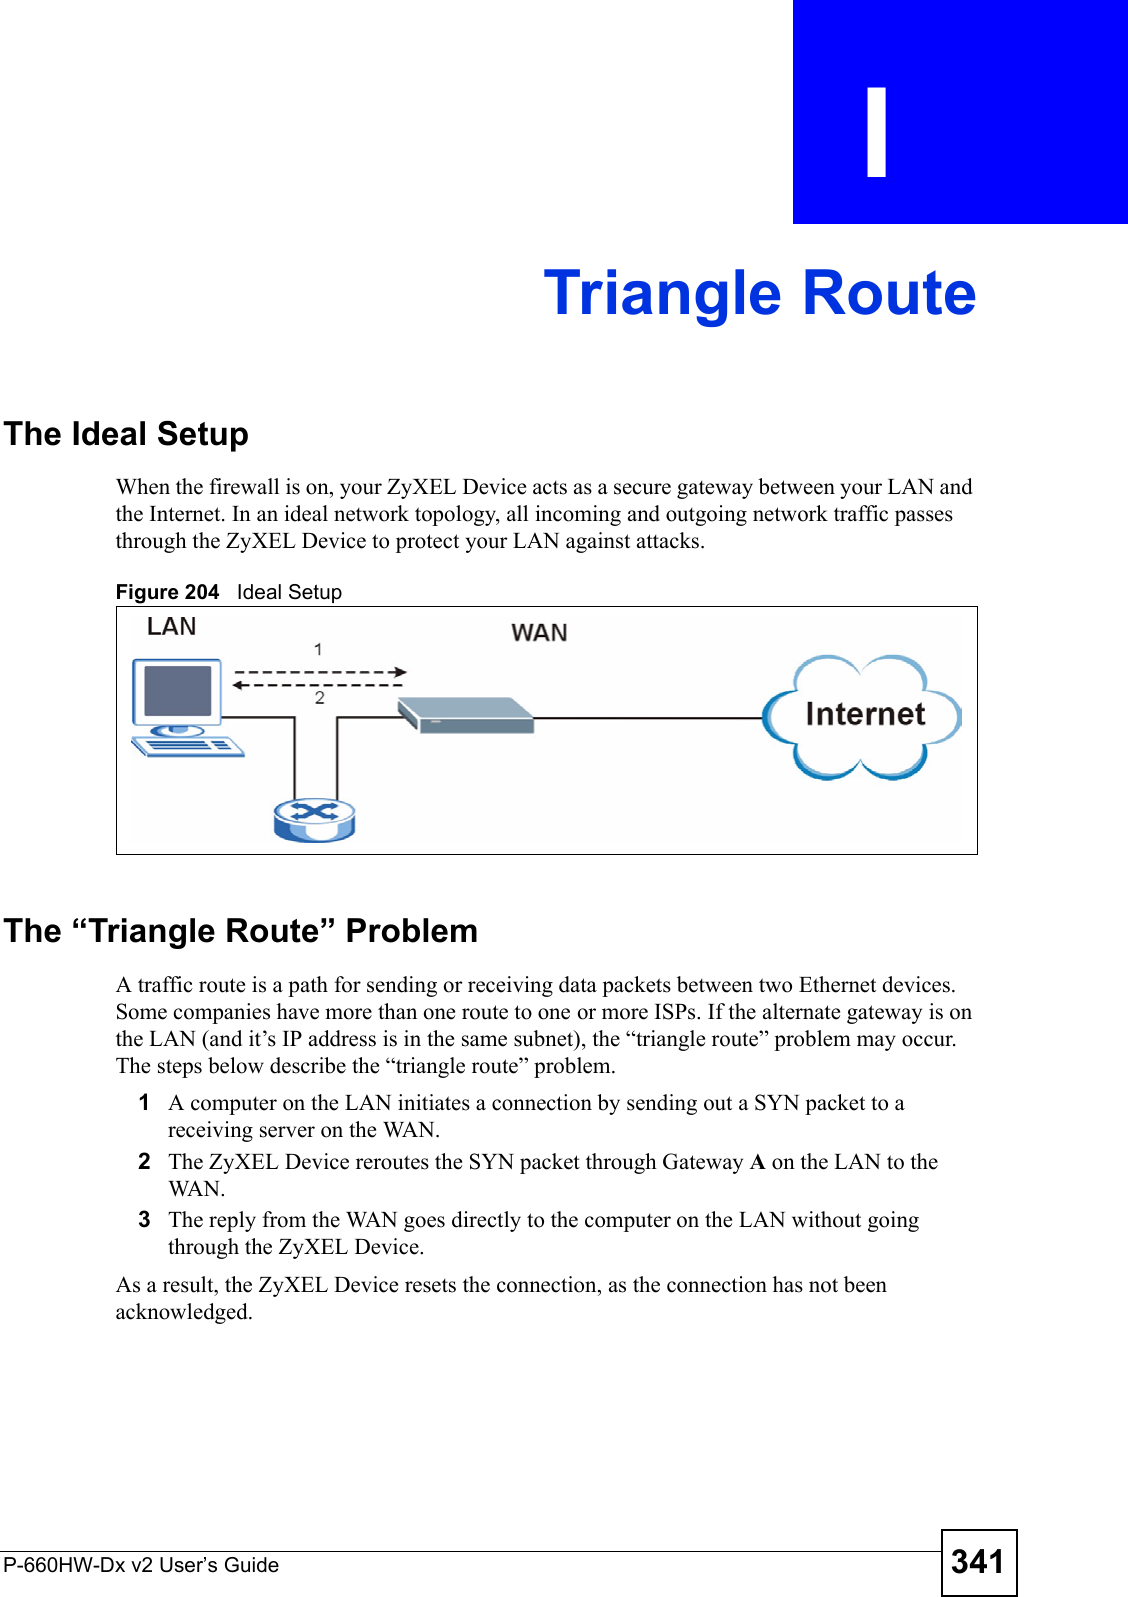 P-660HW-Dx v2 User’s Guide 341APPENDIX  I Triangle RouteThe Ideal Setup When the firewall is on, your ZyXEL Device acts as a secure gateway between your LAN and the Internet. In an ideal network topology, all incoming and outgoing network traffic passes through the ZyXEL Device to protect your LAN against attacks.Figure 204   Ideal SetupThe “Triangle Route” ProblemA traffic route is a path for sending or receiving data packets between two Ethernet devices. Some companies have more than one route to one or more ISPs. If the alternate gateway is on the LAN (and it’s IP address is in the same subnet), the “triangle route” problem may occur. The steps below describe the “triangle route” problem. 1A computer on the LAN initiates a connection by sending out a SYN packet to a receiving server on the WAN.2The ZyXEL Device reroutes the SYN packet through Gateway A on the LAN to the WA N.  3The reply from the WAN goes directly to the computer on the LAN without going through the ZyXEL Device. As a result, the ZyXEL Device resets the connection, as the connection has not been acknowledged.